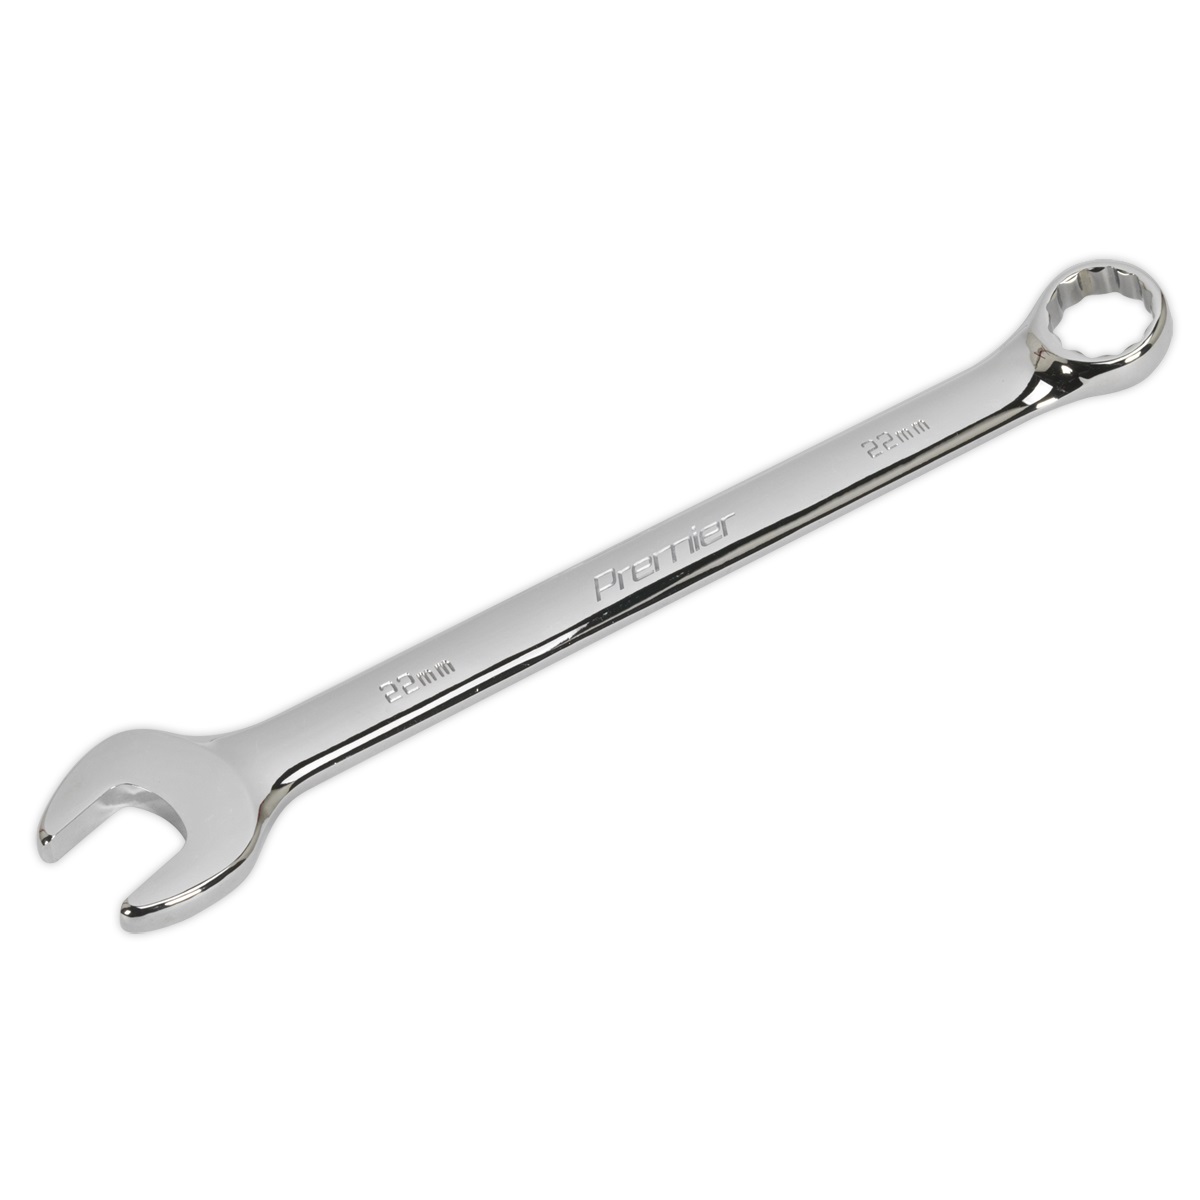 Sealey Combination Spanner 22mm CW22
High quality Premier WallDrive® combination spanner